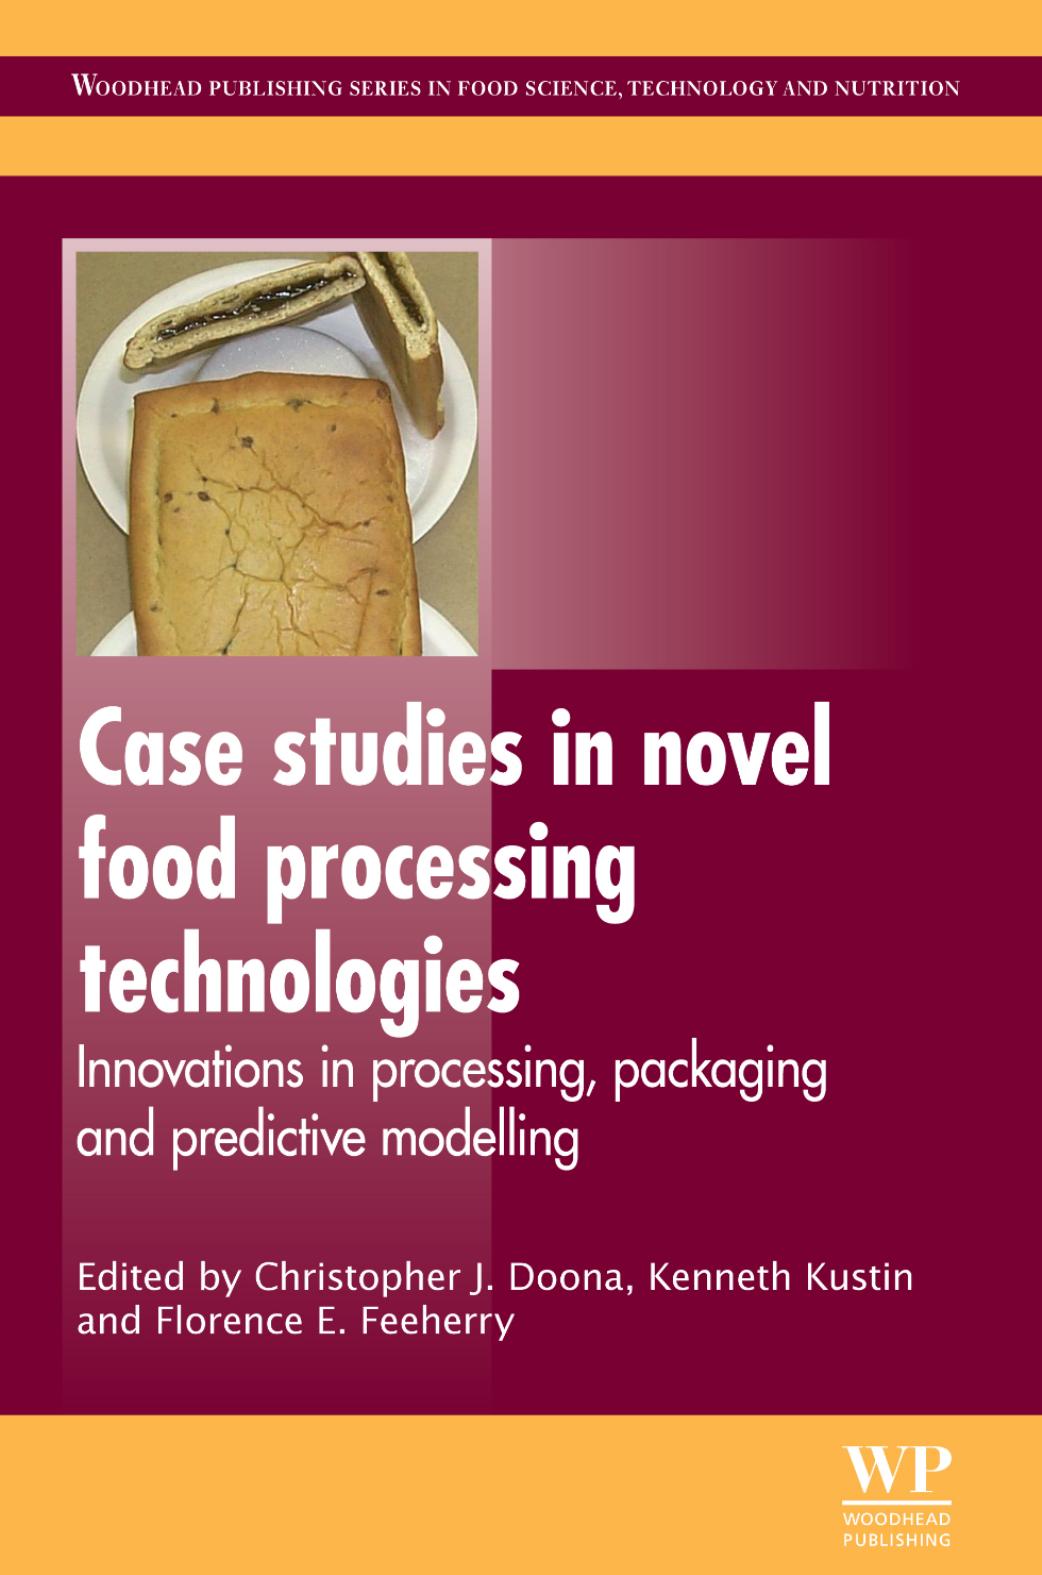 Case Studies in Novel Food Processing Technologies  Innovations in Processing, Packaging, and Predictive Modelling. 2010